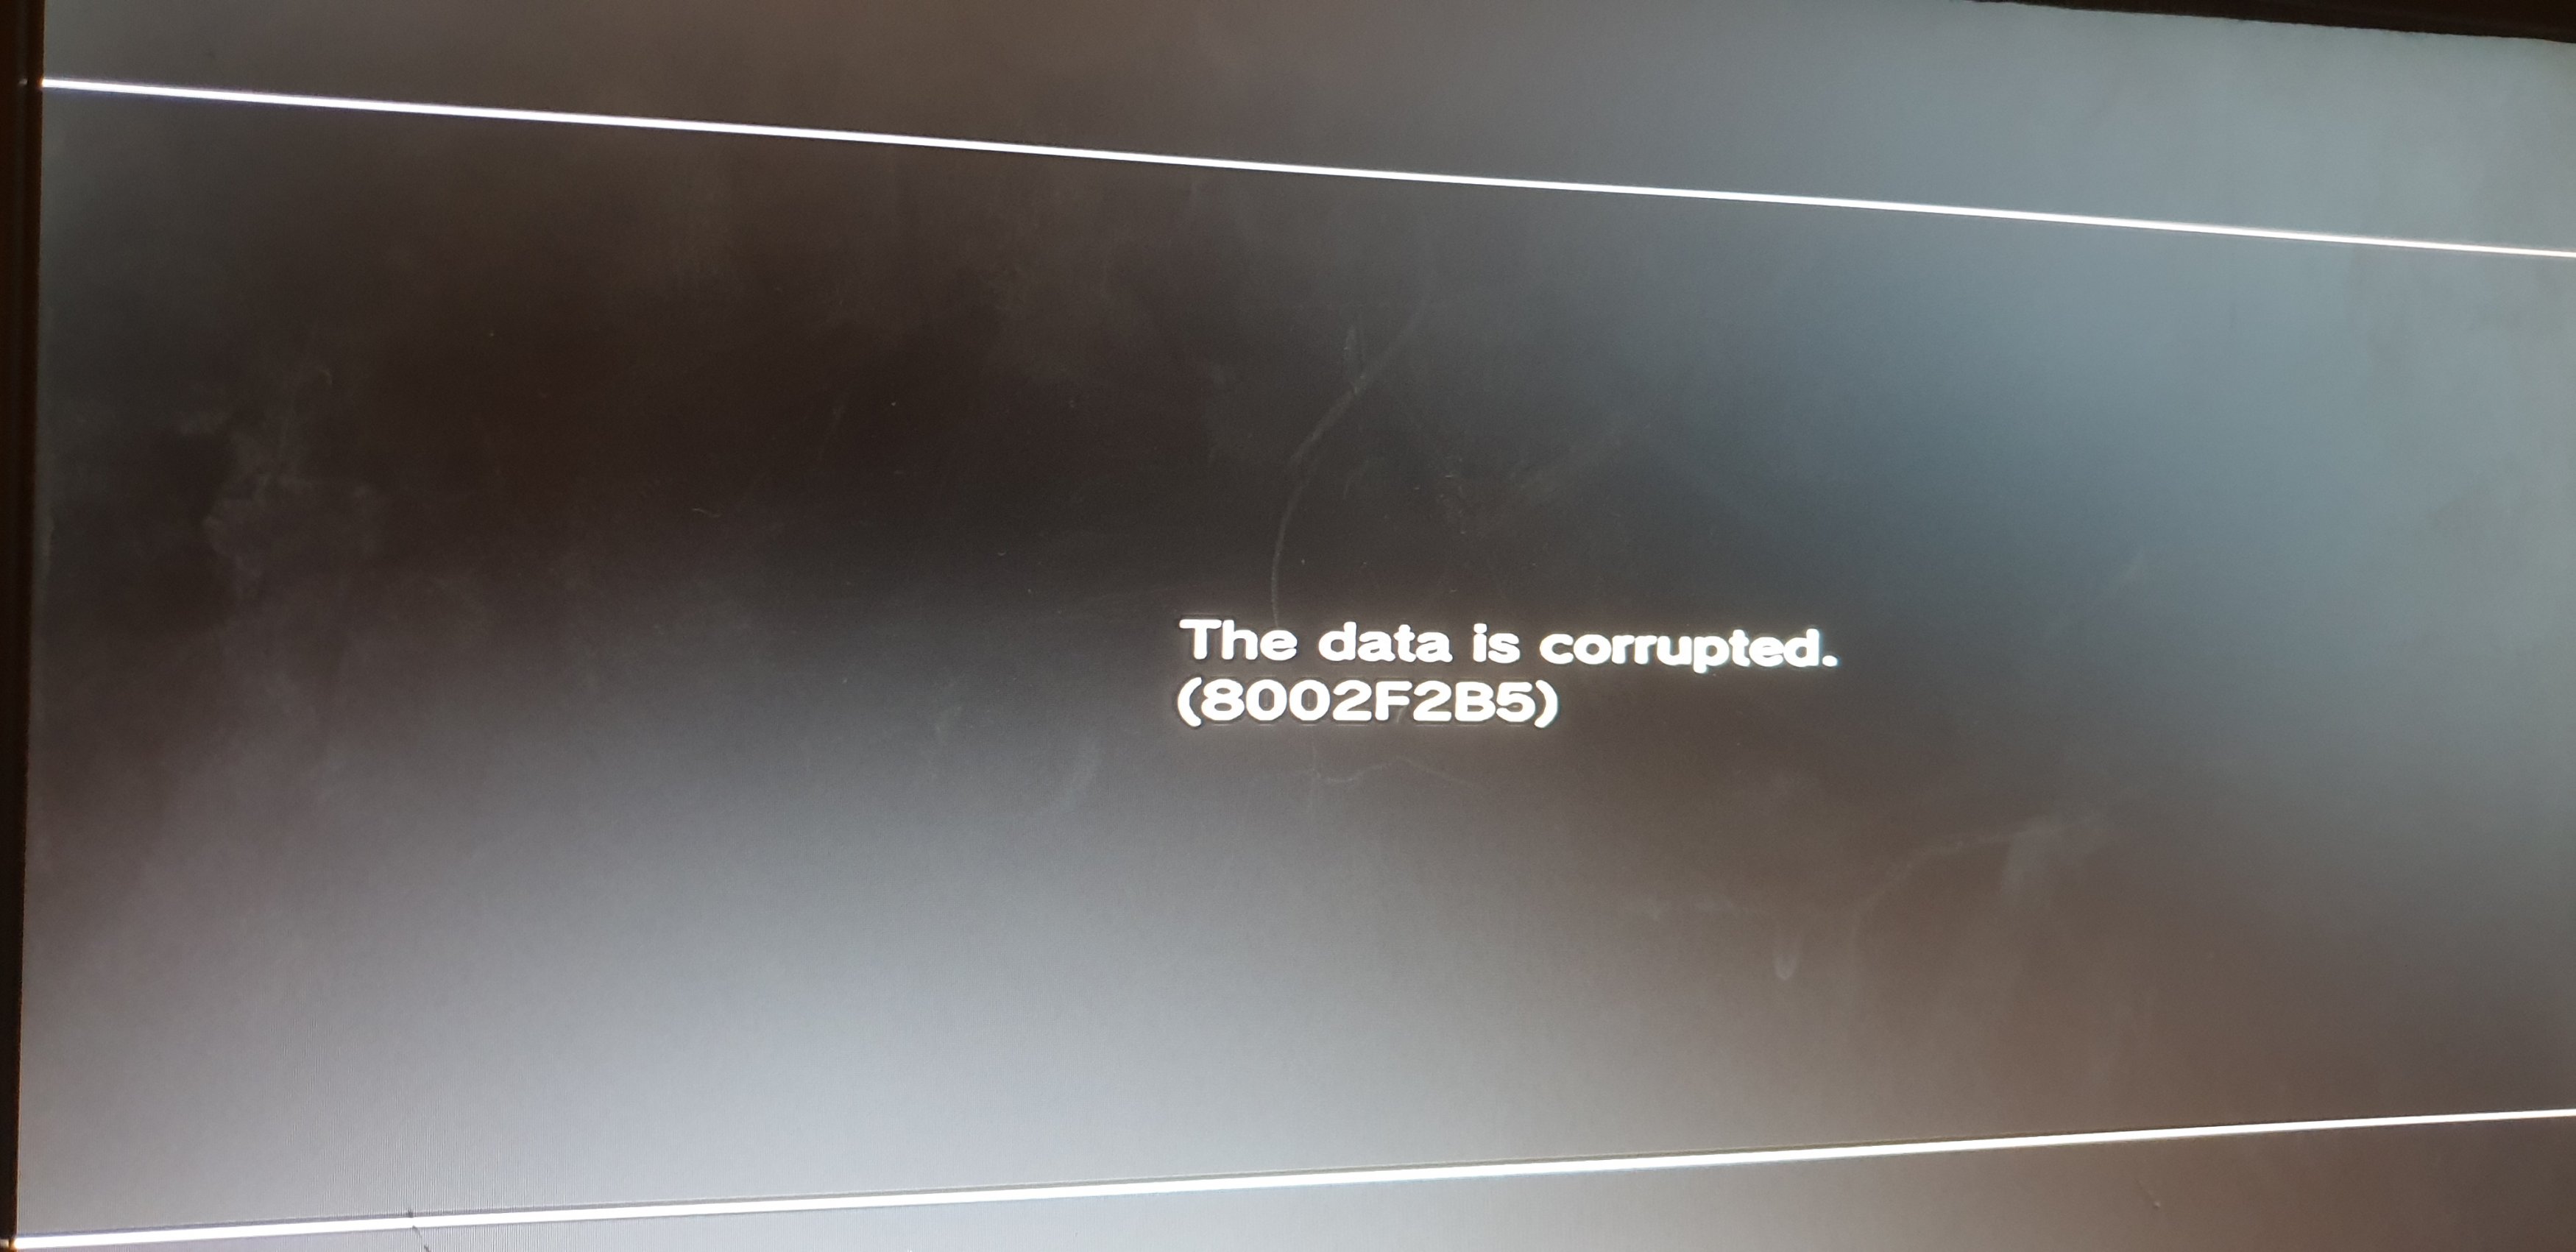 Any fixes for PS3 RSoD? "Serious error has occurred" 3.56 downgradeable,  CECHL03, not running CFW | GBAtemp.net - The Independent Video Game  Community